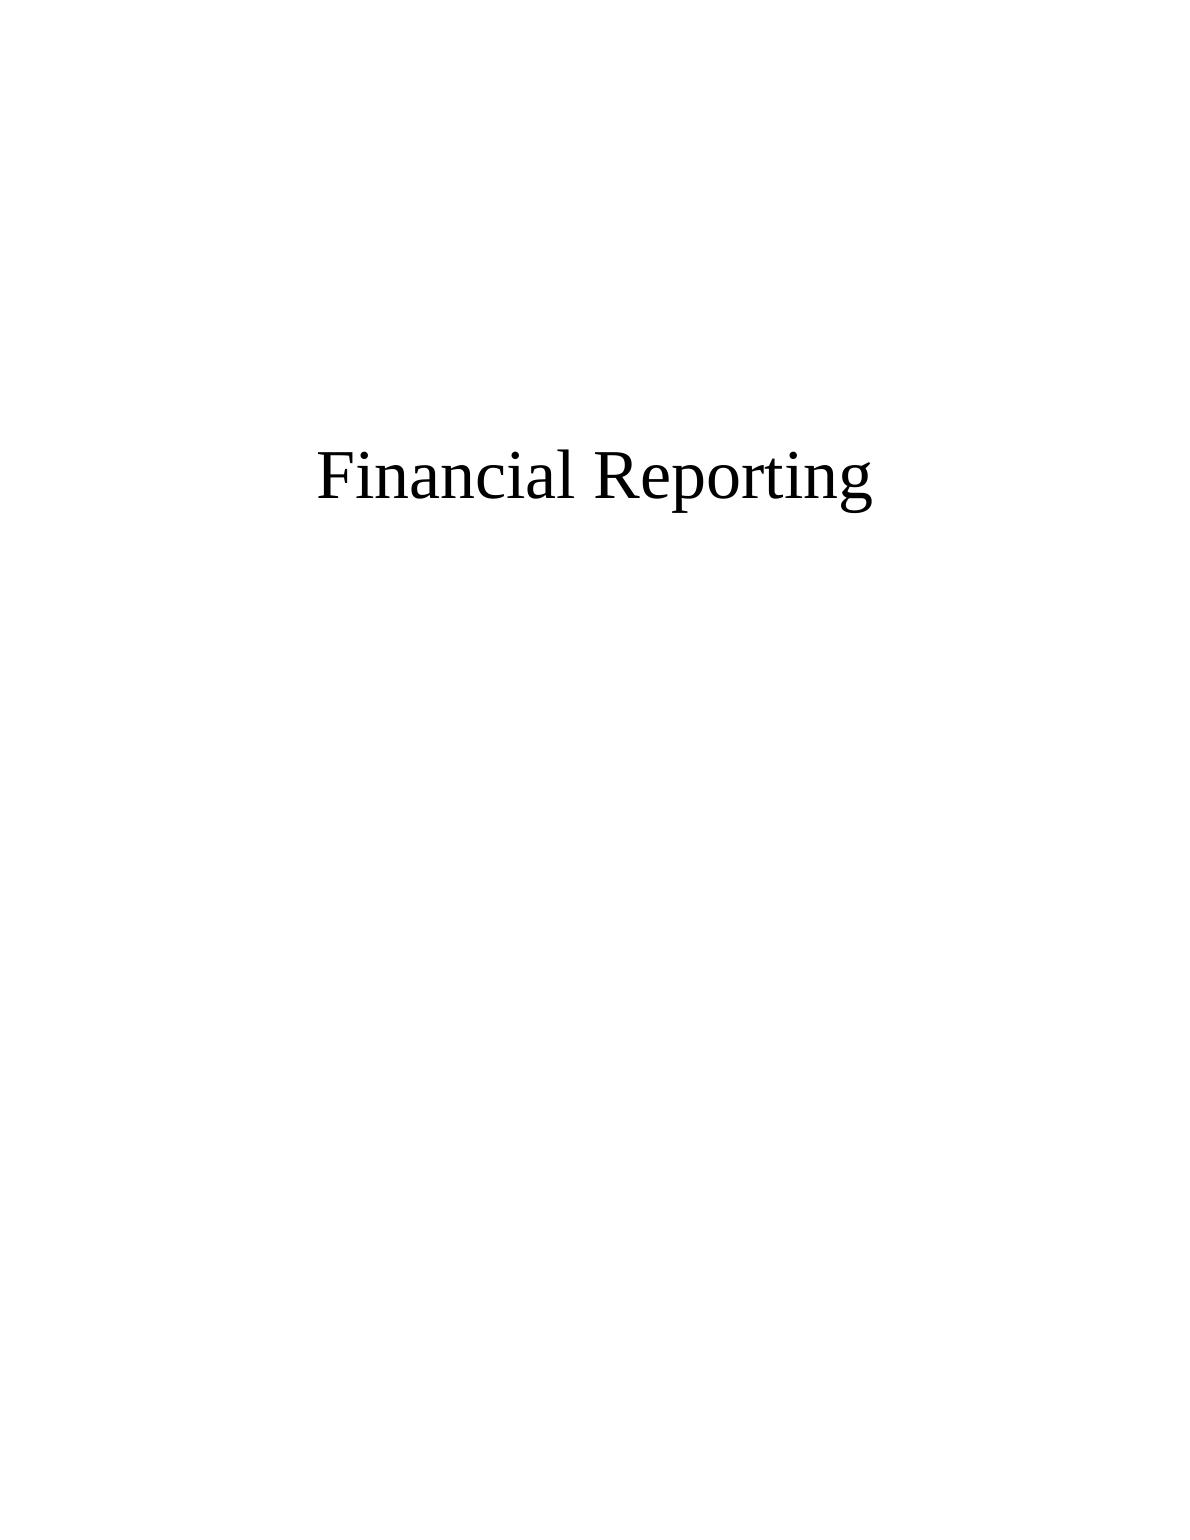 Financial Reporting Solution Assignment (Doc)_1